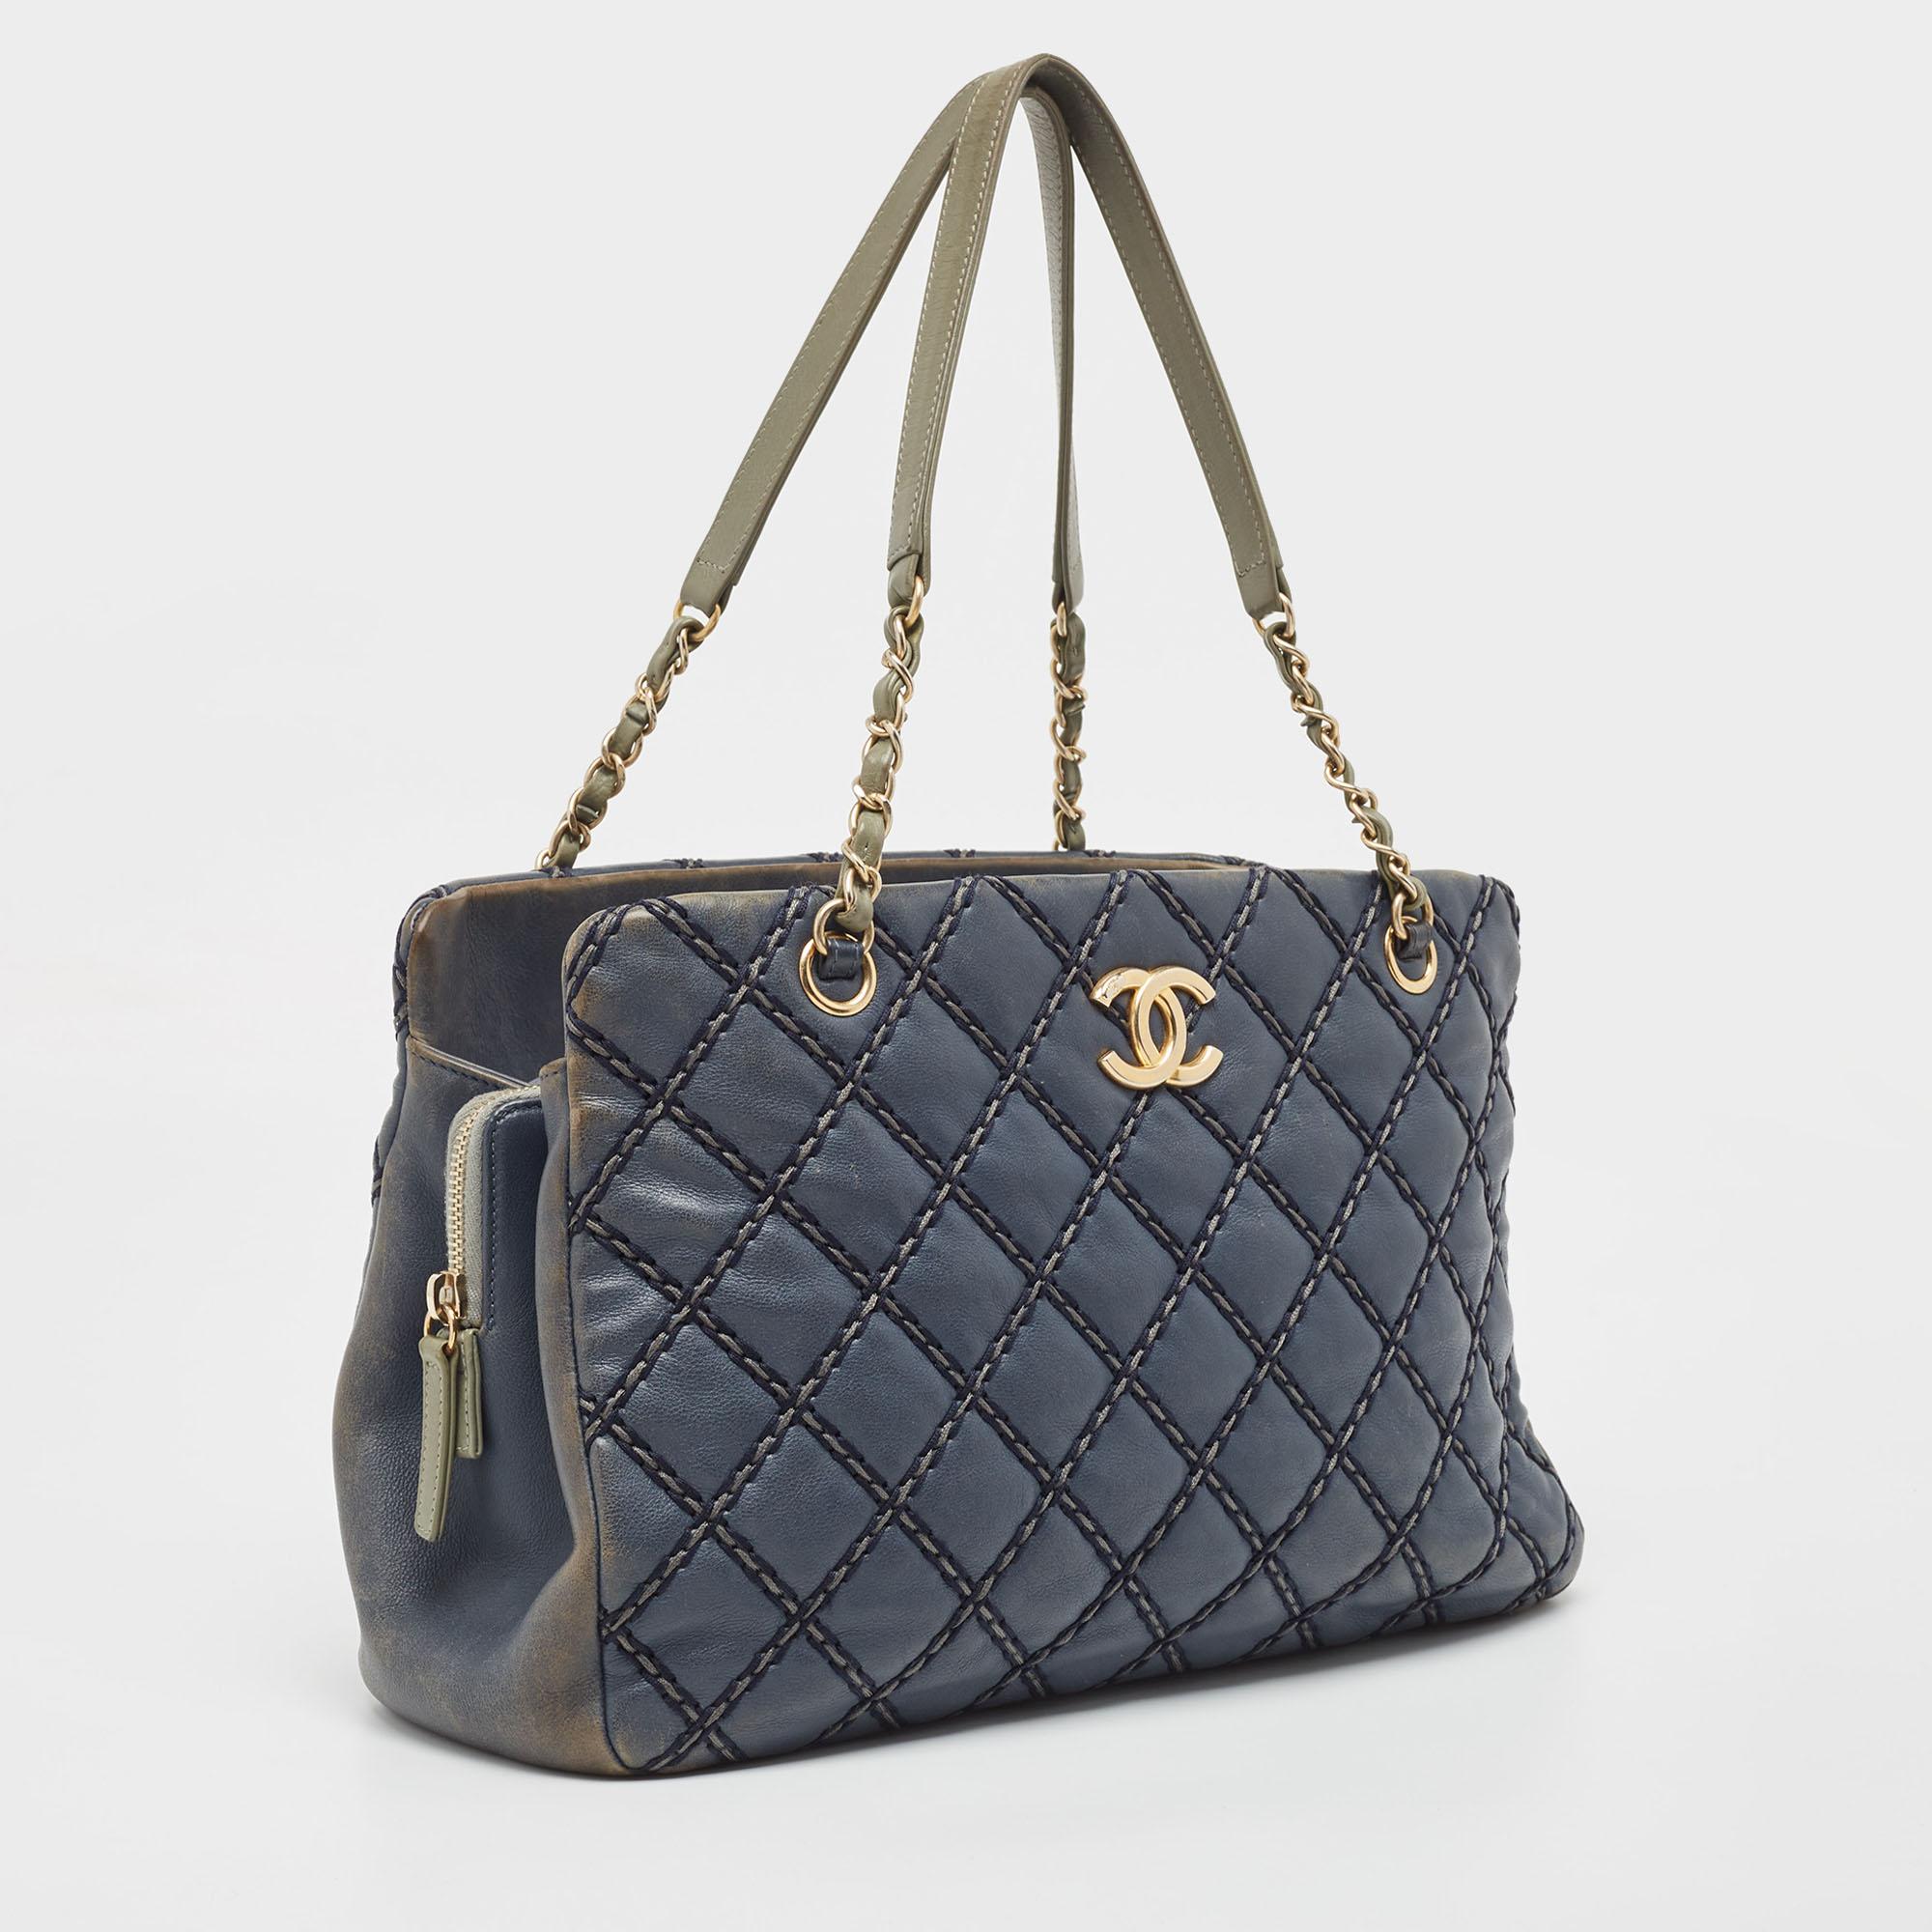 Women's Chanel Blue Quilted Wild Stitched Leather Chain Tote For Sale